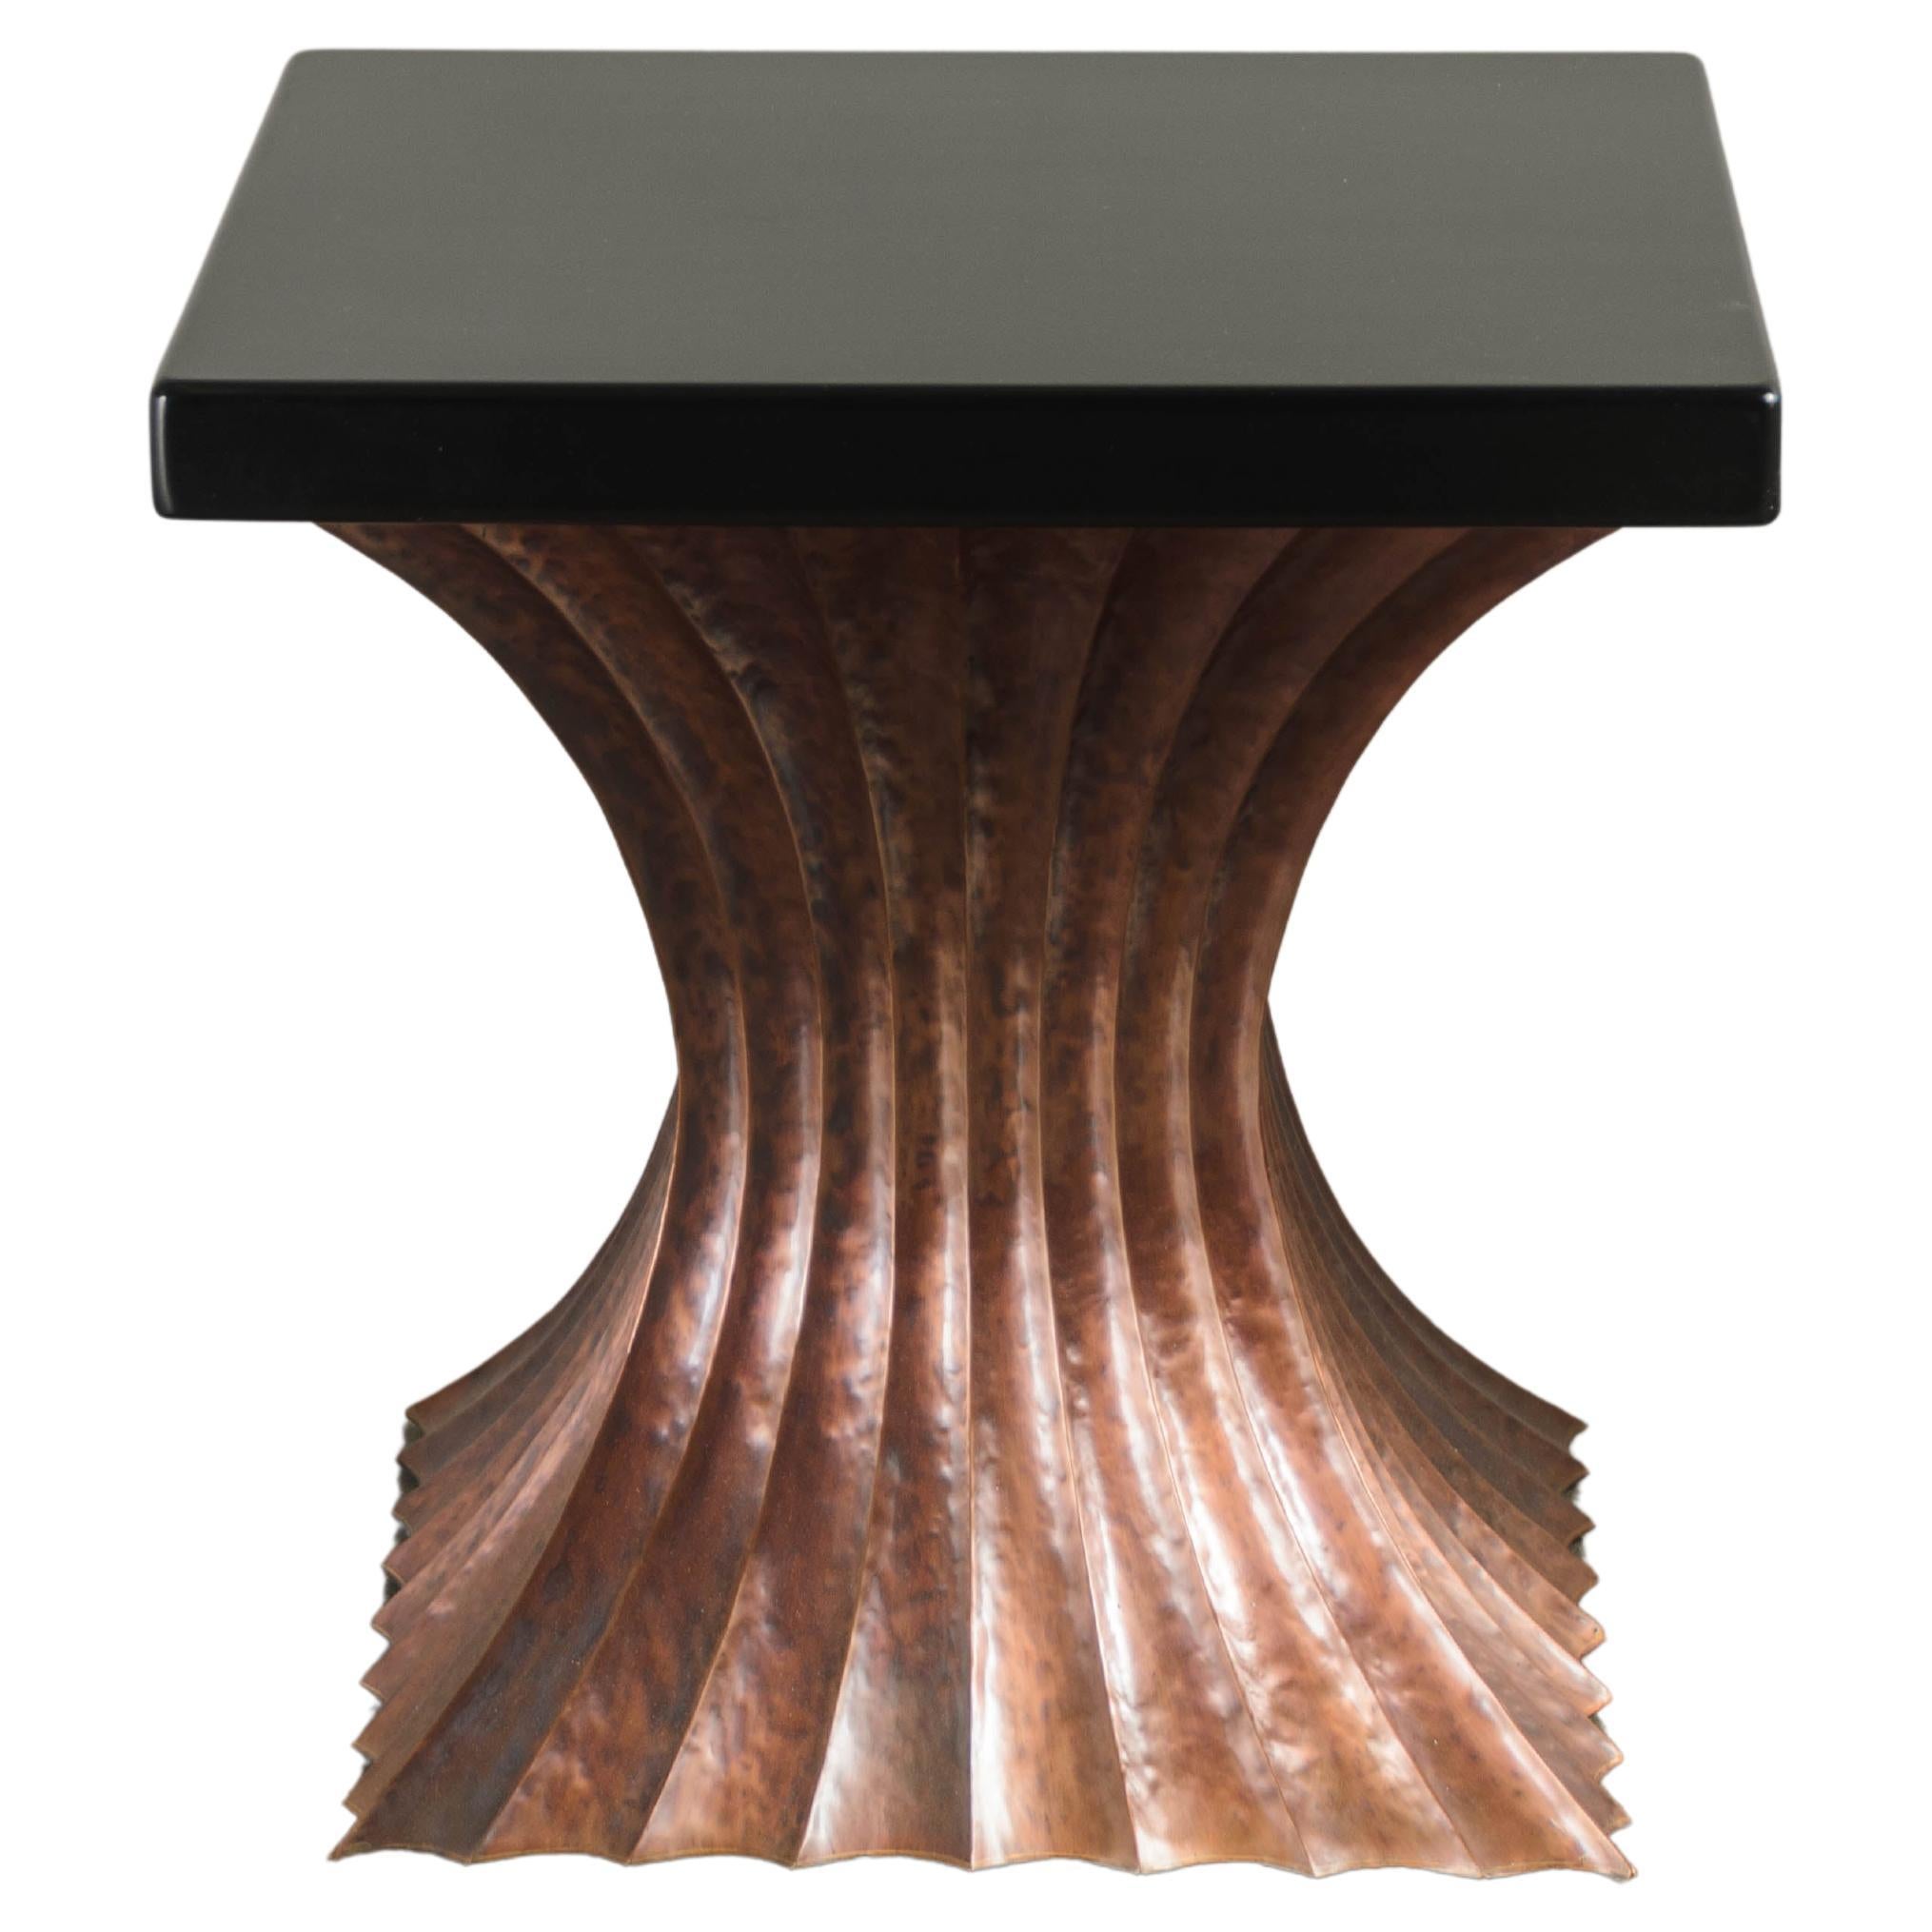 Contemporary Copper Square Fluted Table with Black Lacquer Top by Robert Kuo